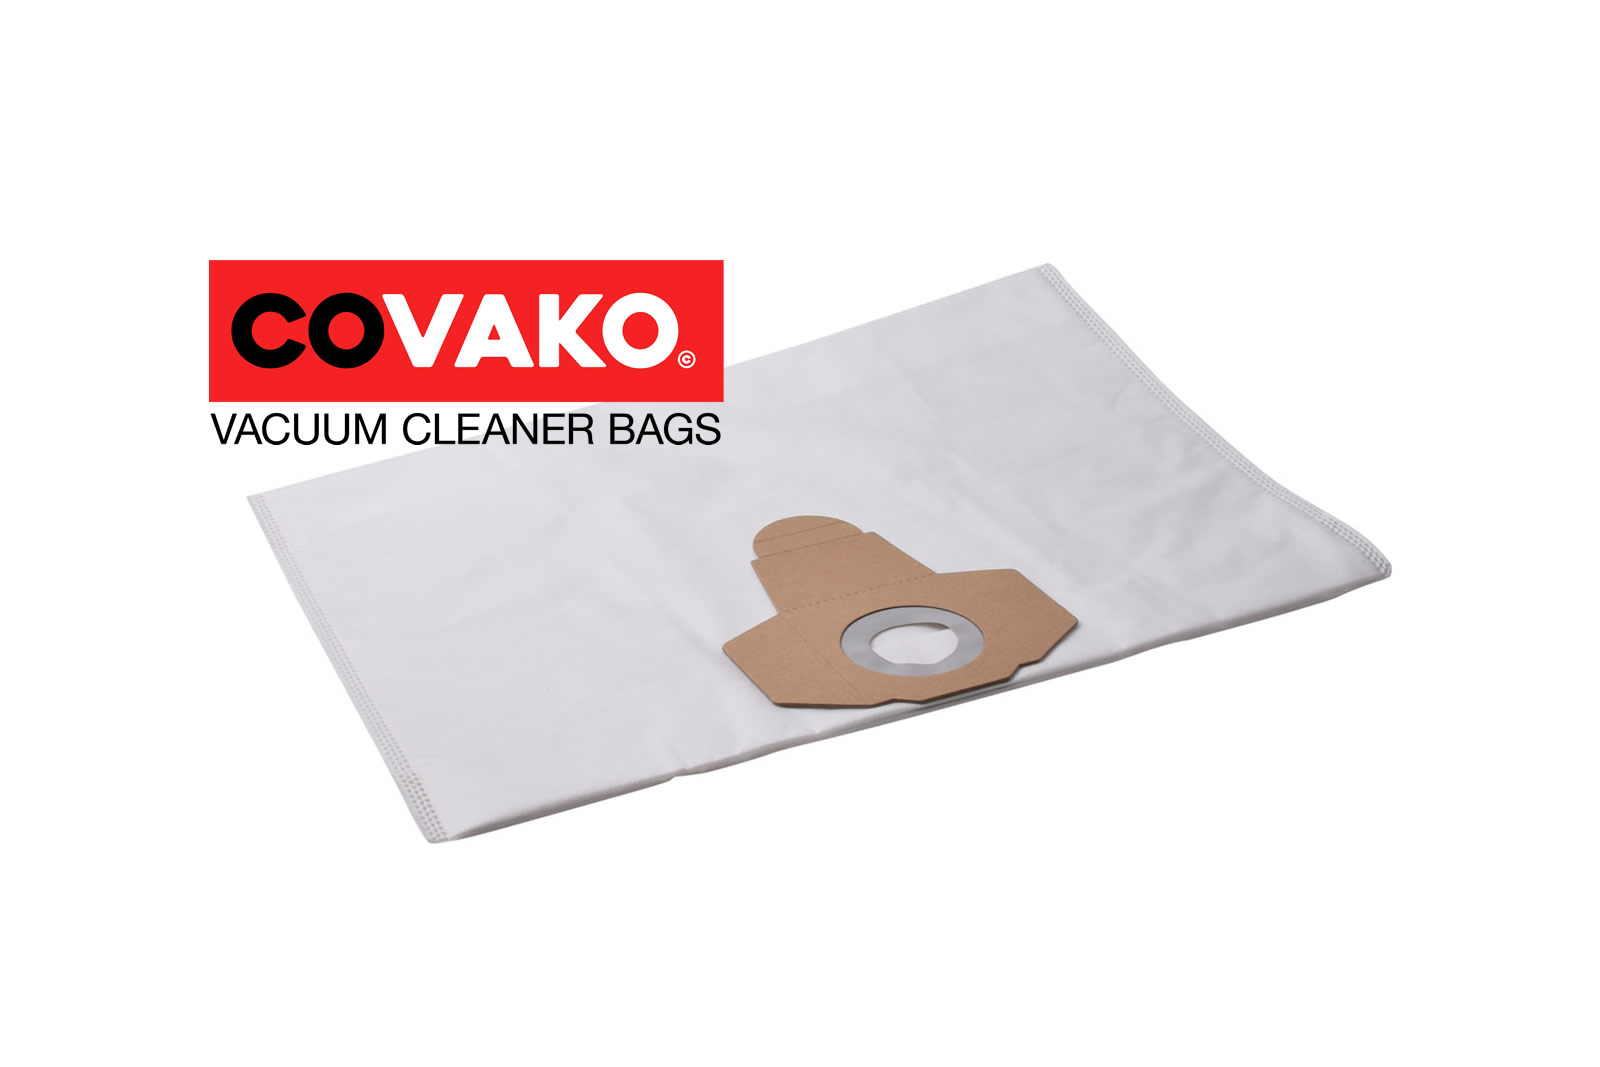 Einhell RT-VC 1630 SA / Synthesis - Einhell vacuum cleaner bags